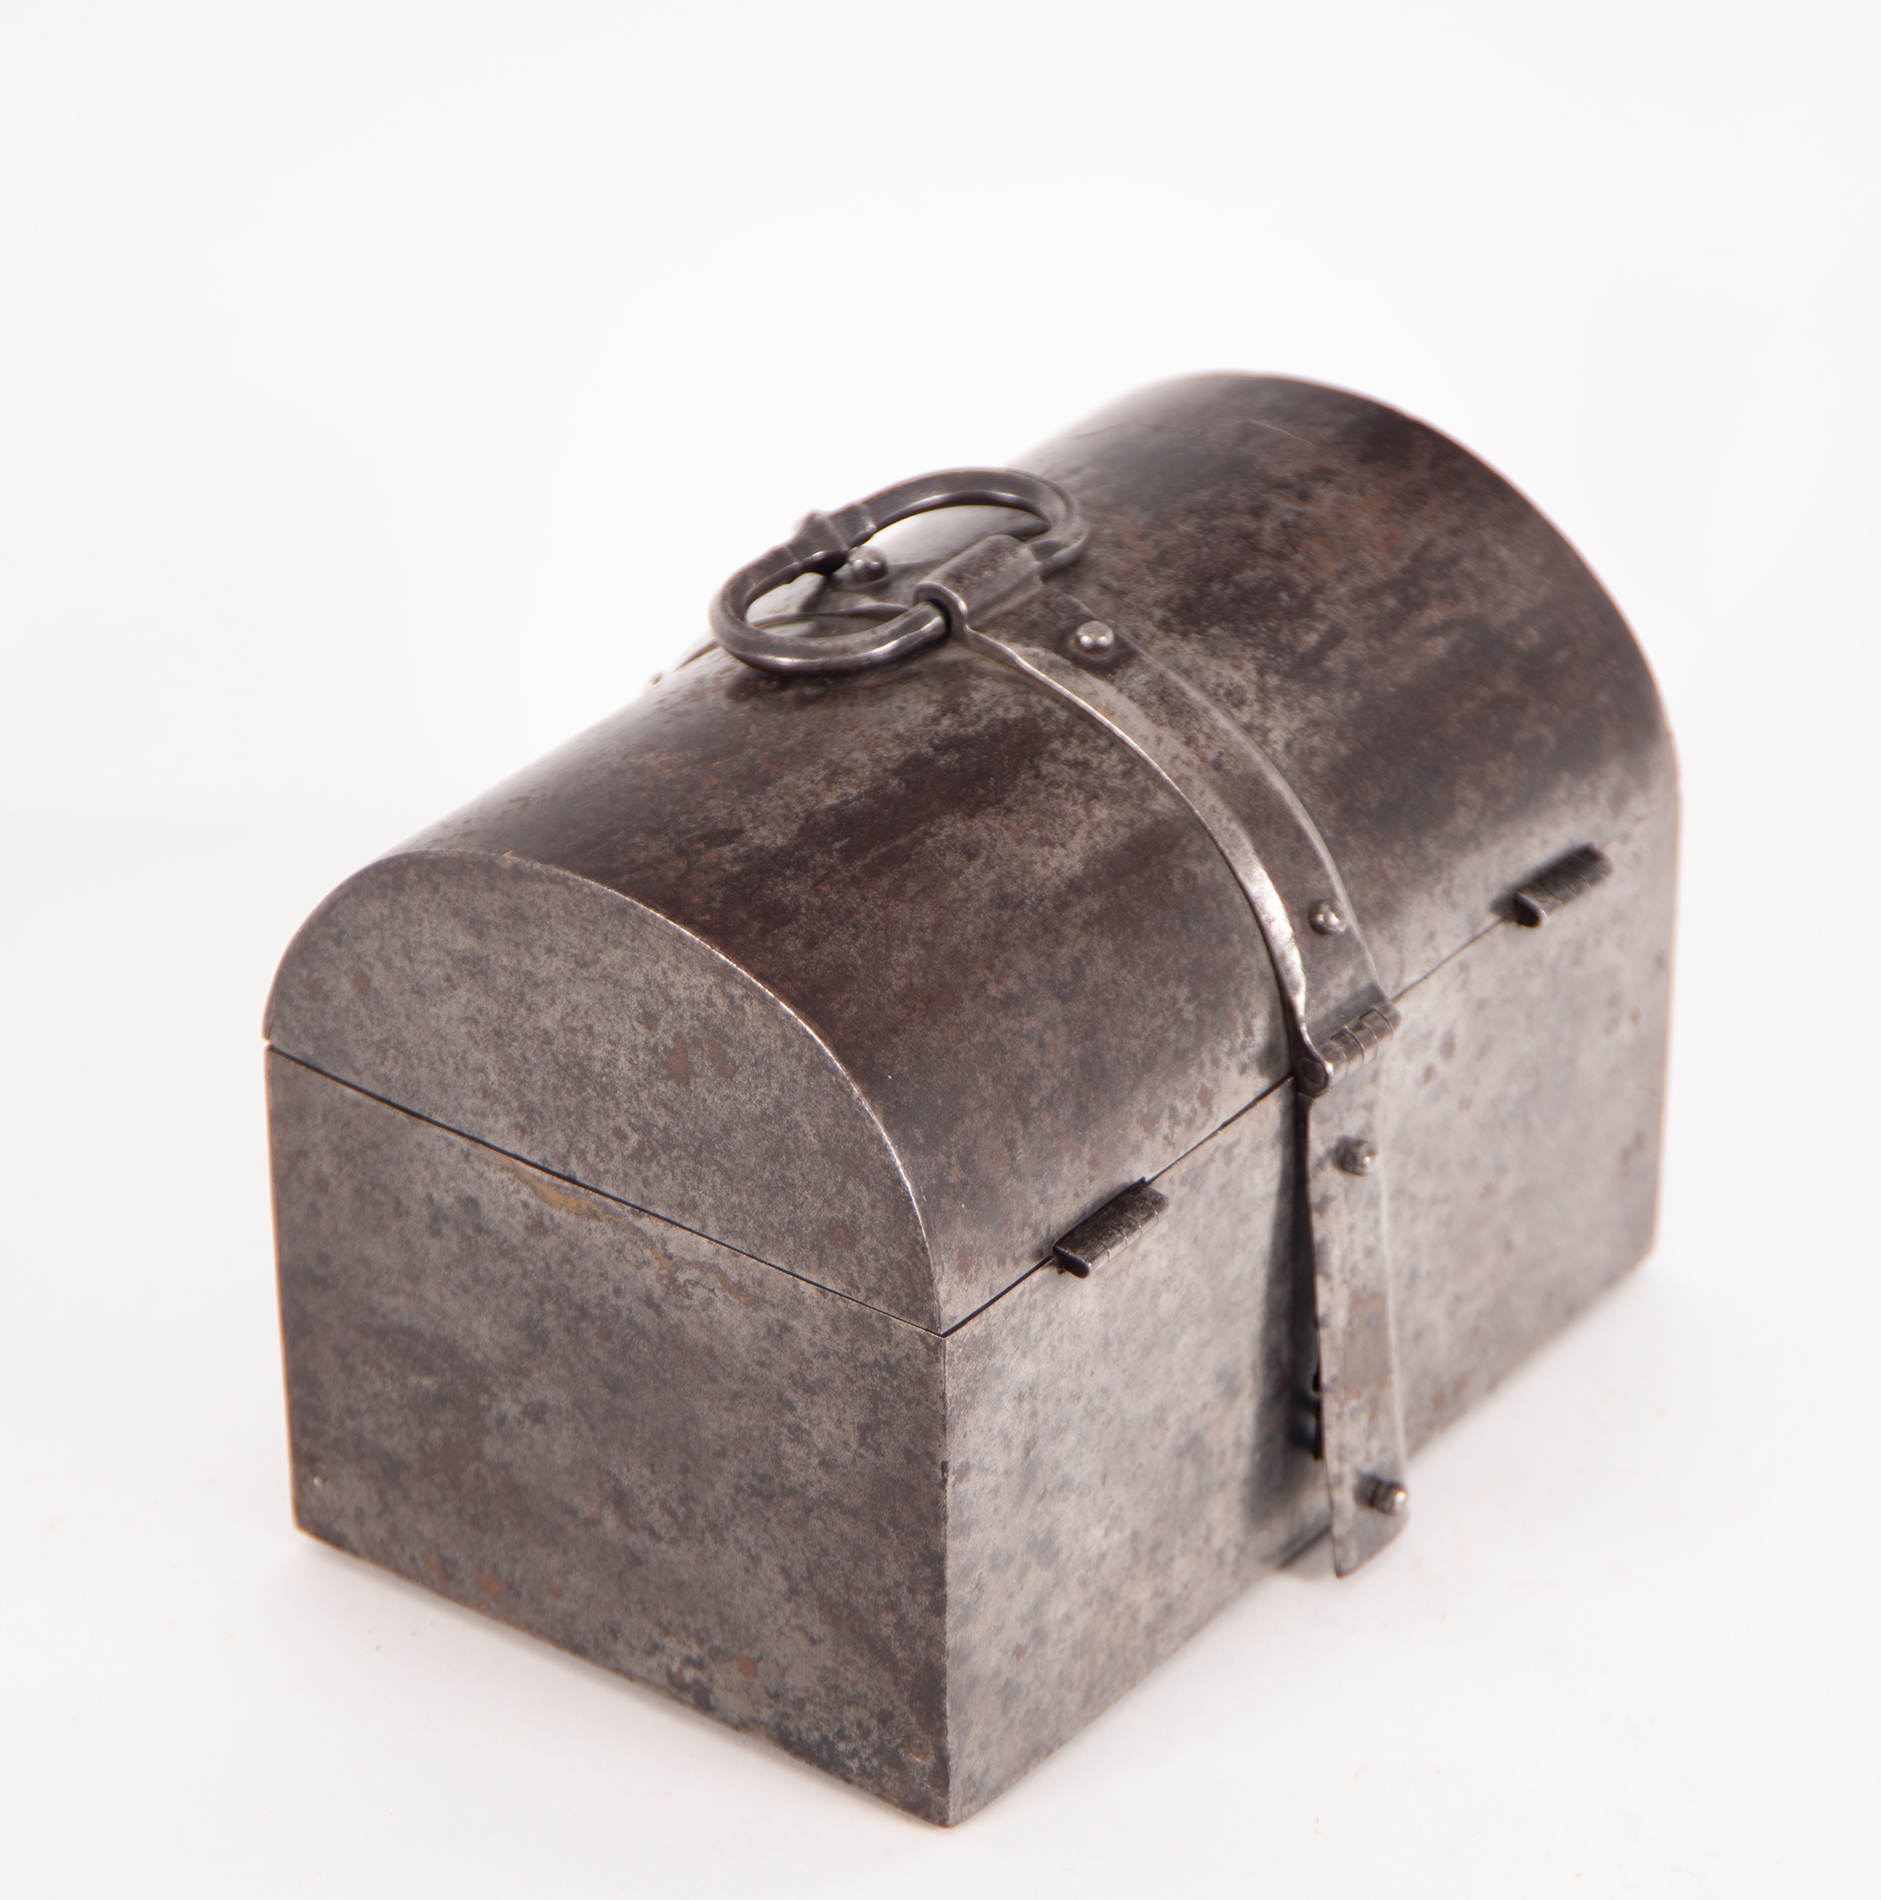 Cash box in forge, Nuremberg, 16th century - Image 2 of 6